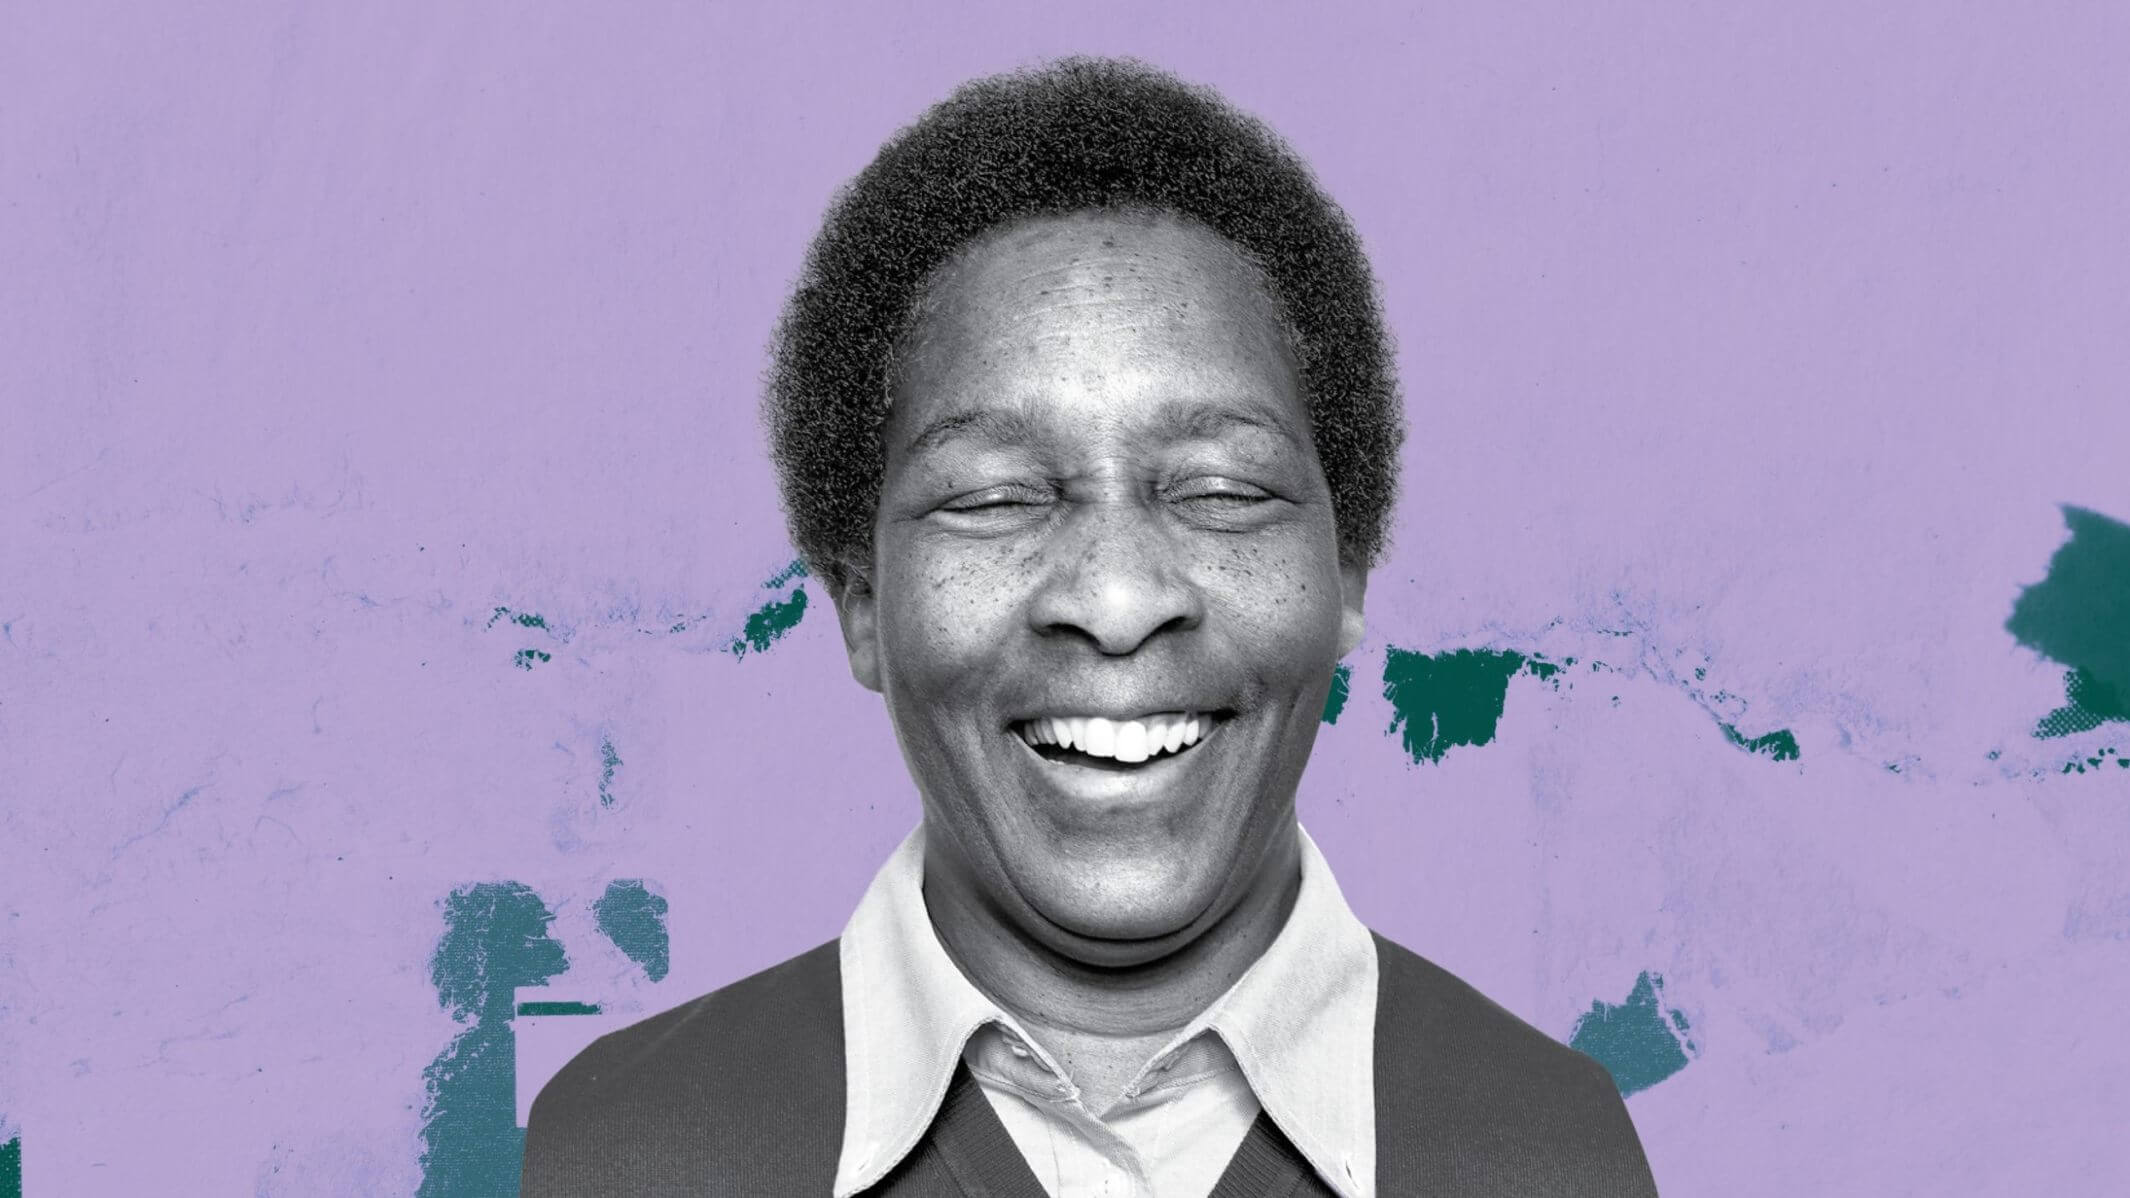 An Image of Loretta Claiborne smiling with her eyes closed. She is in black and white but there is a colorful background behind her.